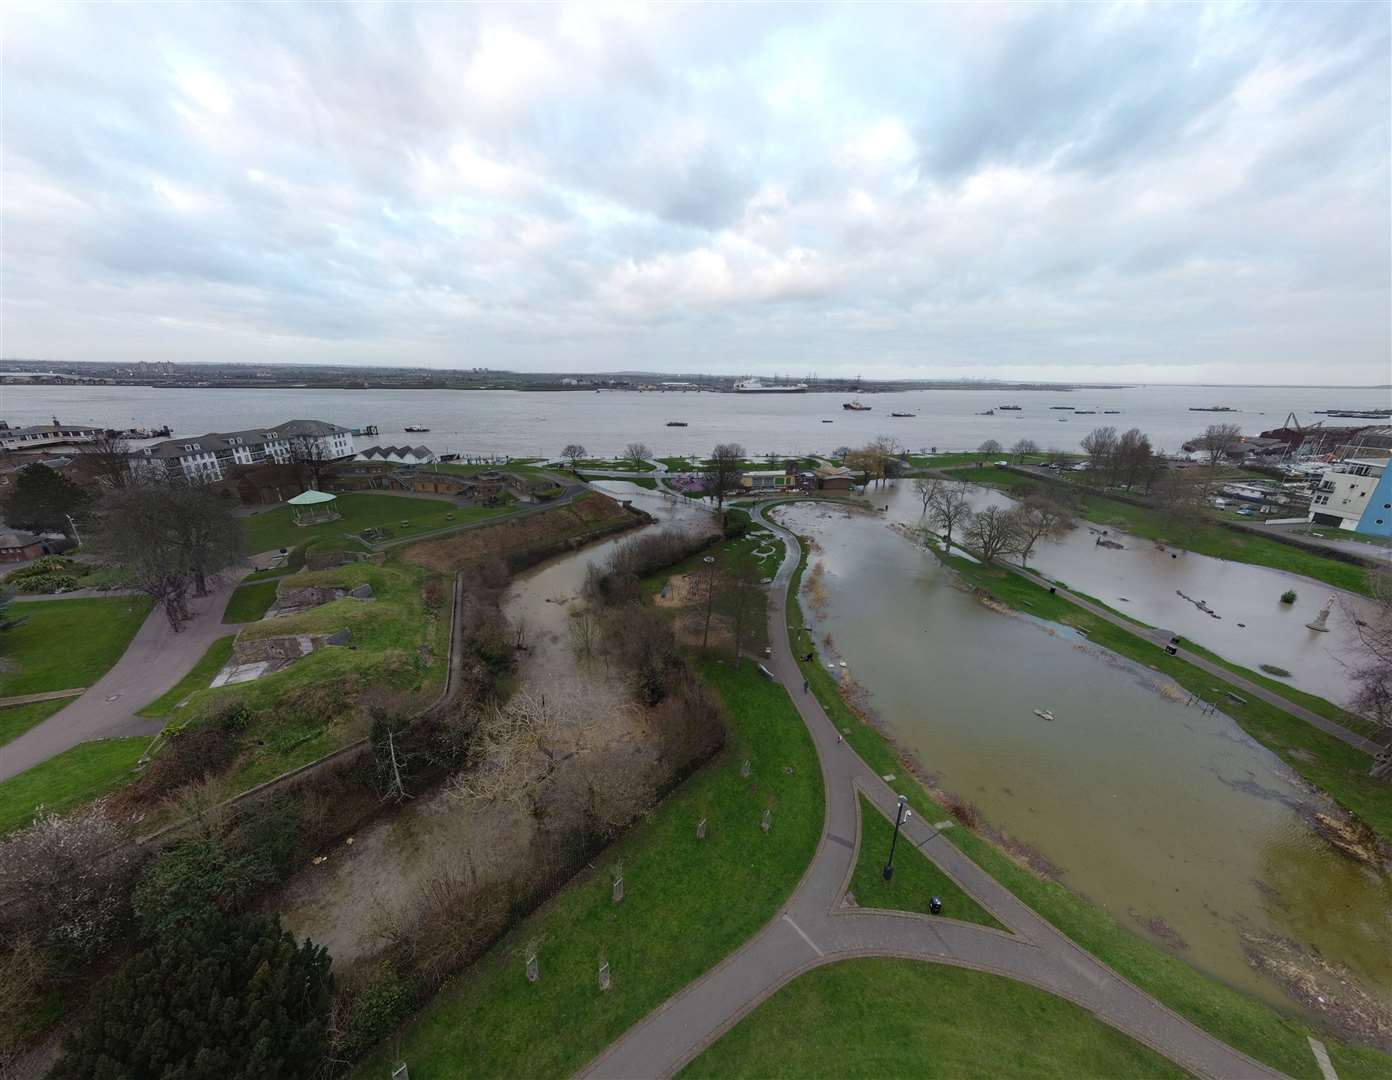 Large sections of Gravesend riverside have been hit by heavy flooding. Picture: Jason Arthur